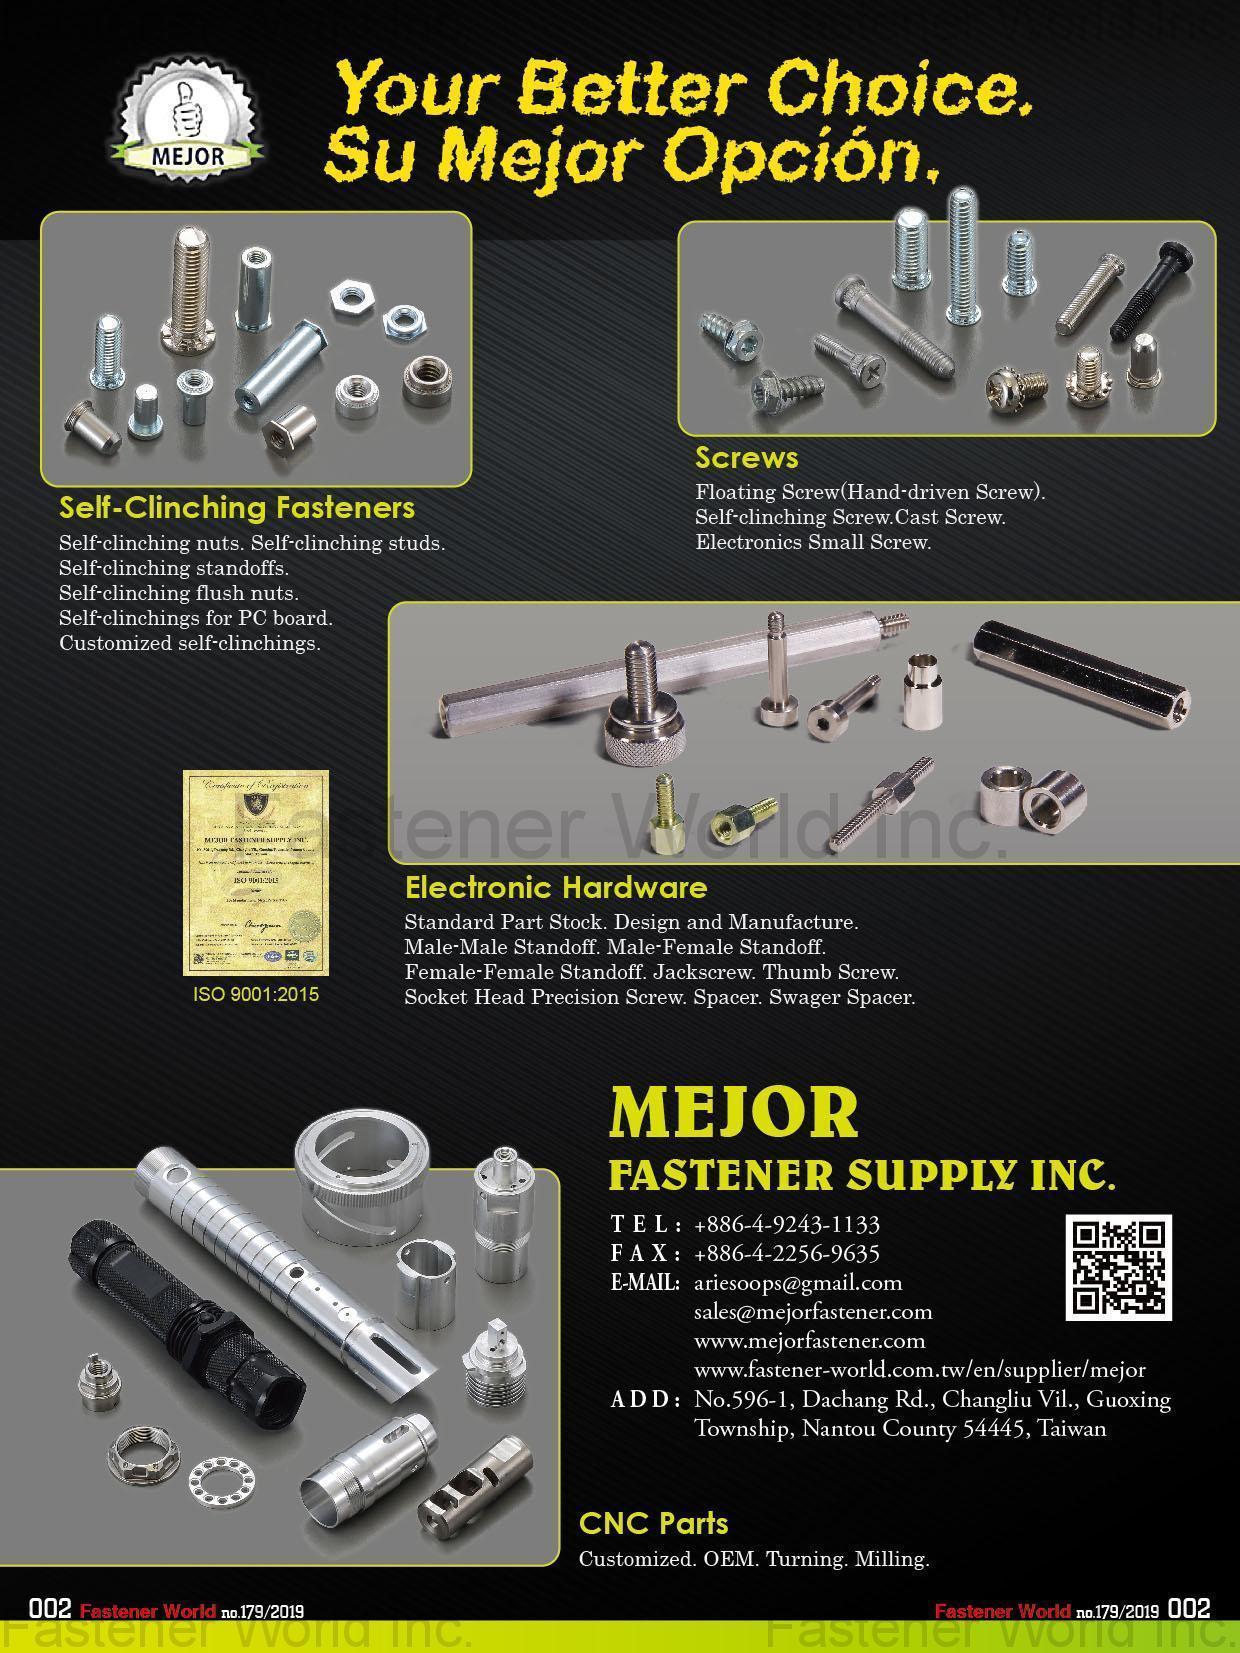 MEJOR FASTENER SUPPLY INC. , Self-Clinching Fasteners,Self-clinching nuts,Self-clinching studs,Self-clinching standoffs,Self-clinching flush nuts,Self-clinching for PC board,Customized self-clinching,screws,Floating Screw(Hand-driven Screw),Self-clinching Screw,Cast Screw,Electronics Small Screw,Electronic Hardware,Standard Part Stock,Design and Manufacture,Male-Male Standoff,Male-Female Standoff,Female-Female Standoff,Jackscrew,Thumb Screw,Socket Head Precision Screw,Spacer,Swager Spacer , Clinch Stud Screws